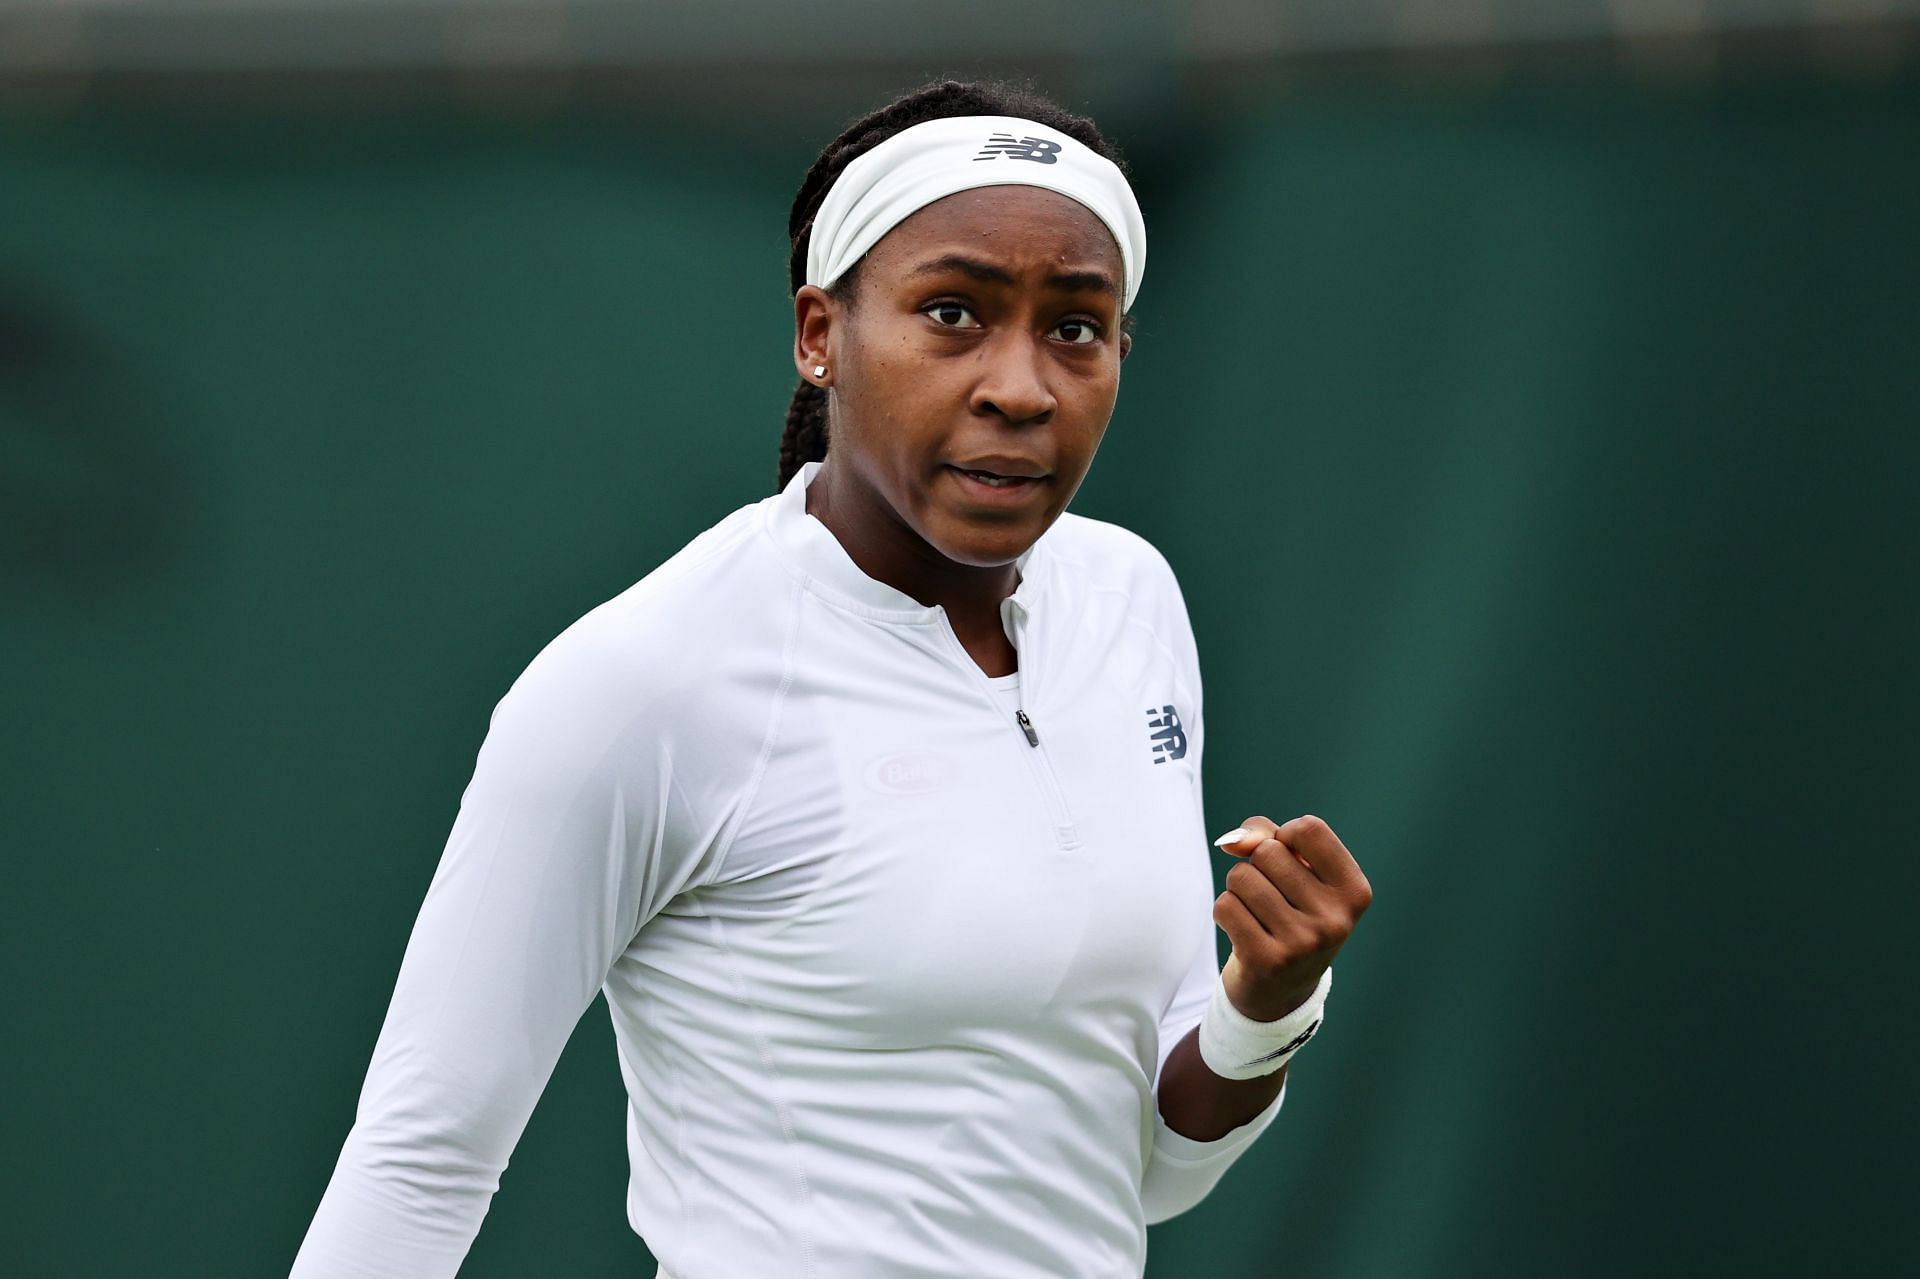 Coco Gauff reckons Frances Tiafoe is the most talkative player on the tennis tour right now